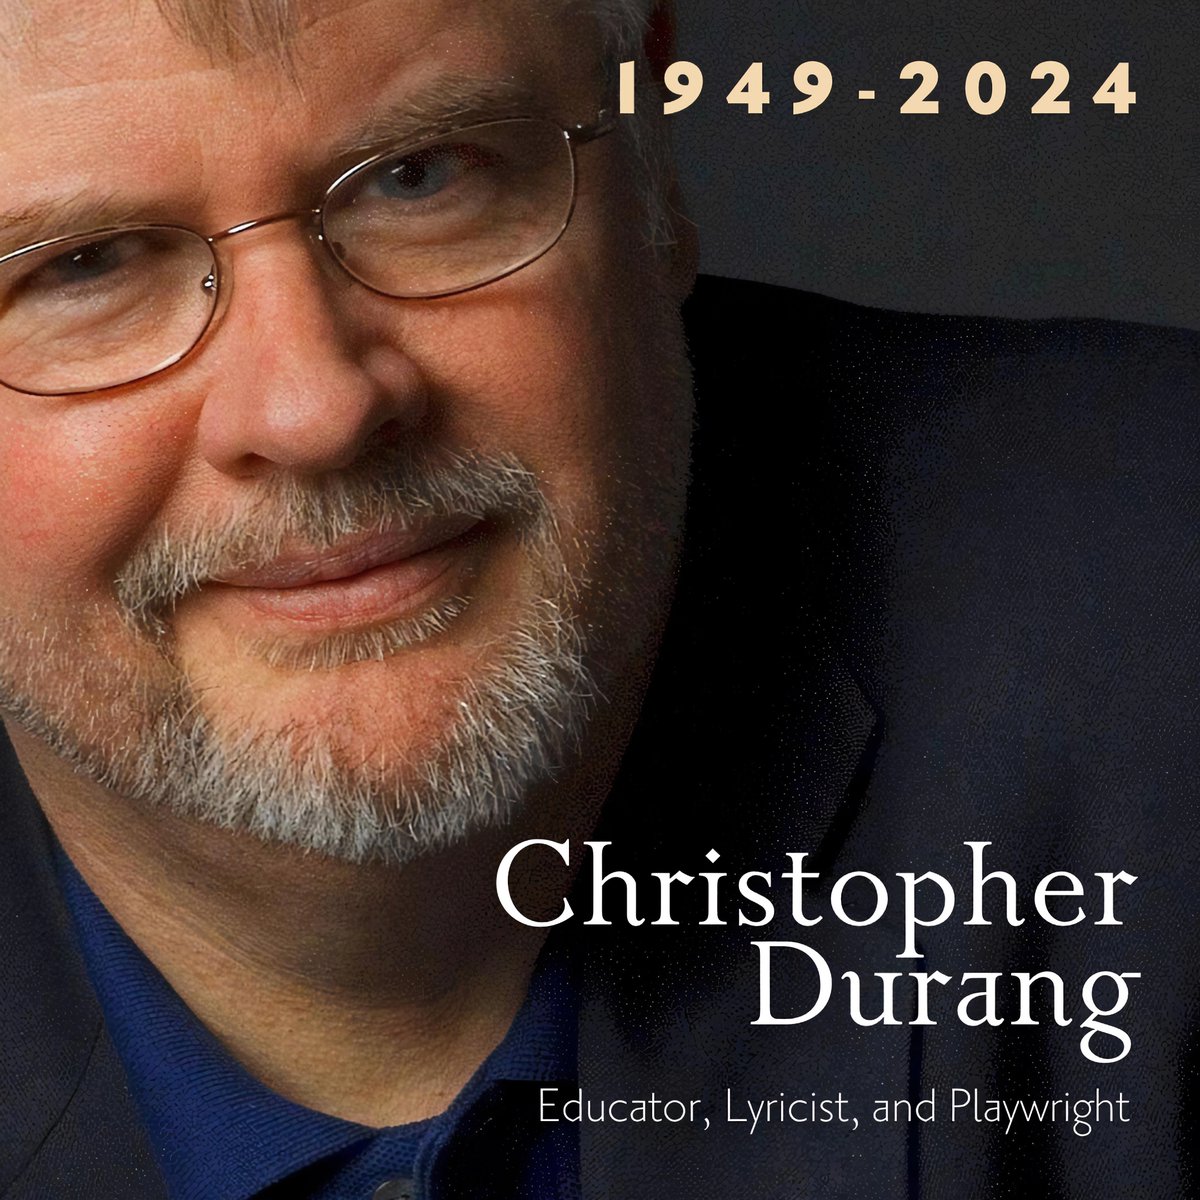 Christopher Durang was not only a giant in our field, but a guiding light whose daring works illuminated the stage with brilliance and wit. His legacy as a playwright, lyricist, and educator is immeasurable, touching the lives of countless artists and audiences alike. As we